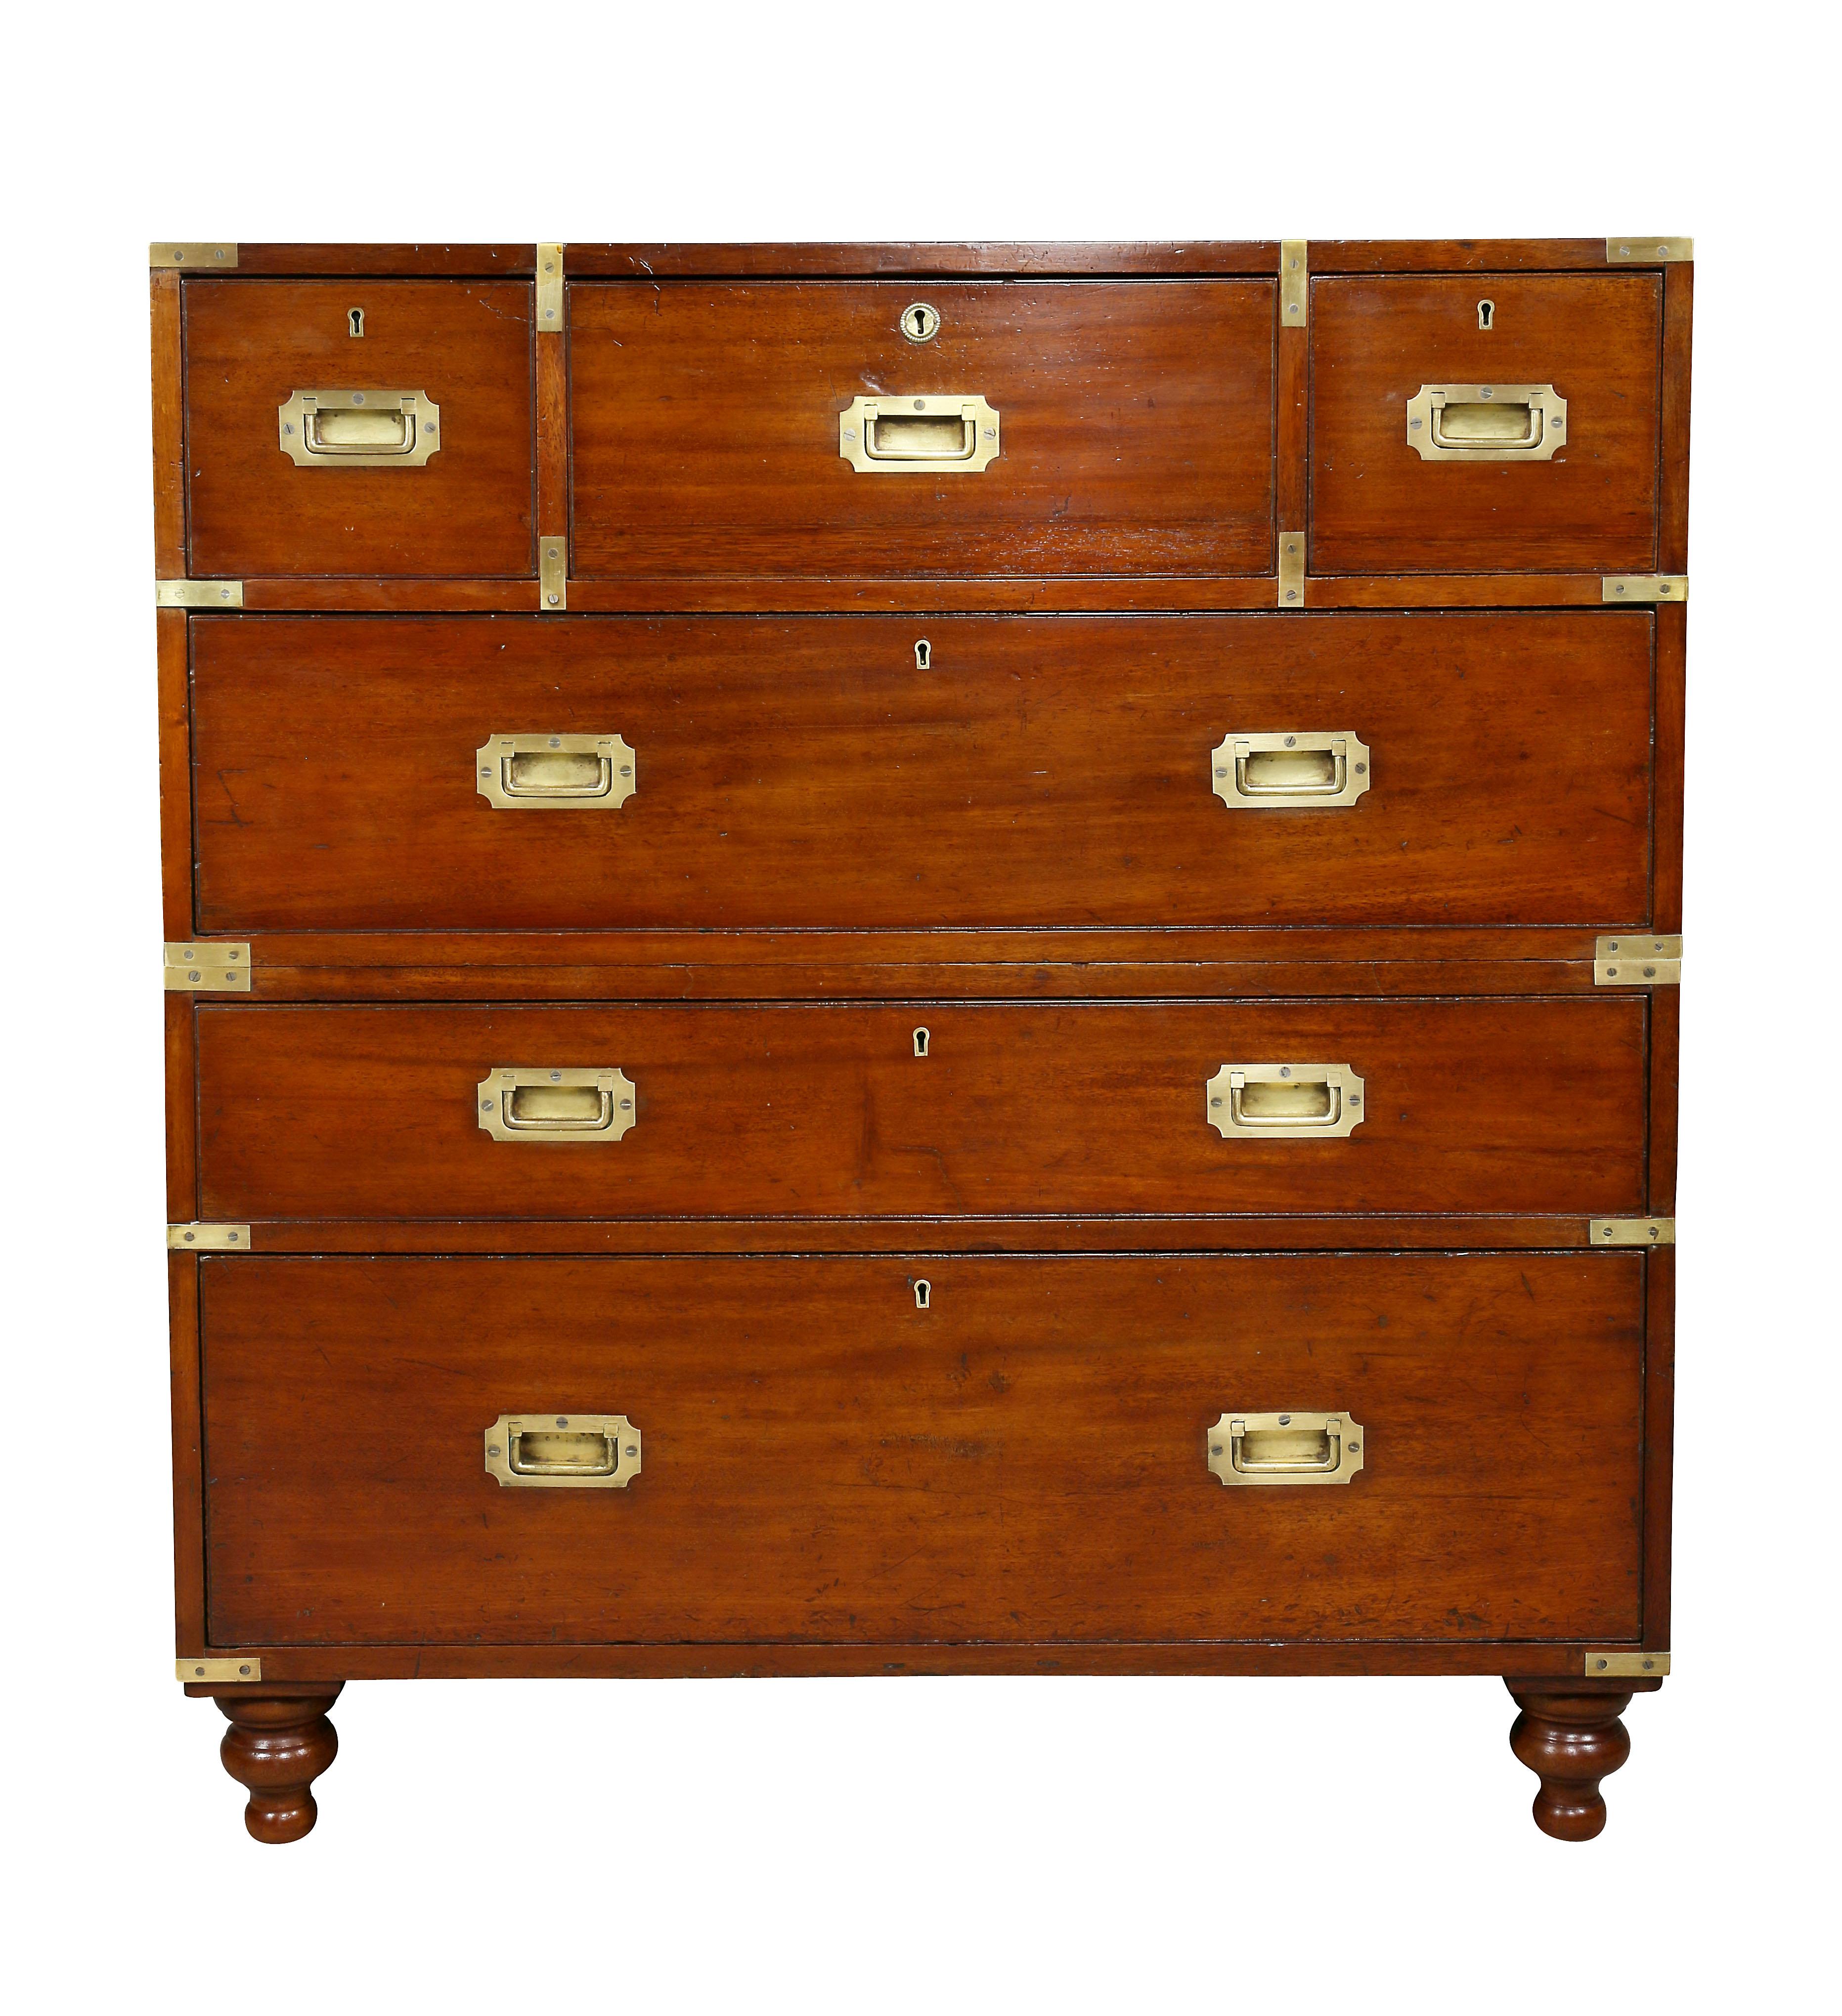 In fine condition, two part with rectangular top over three drawers, the central one finely fitted with a fold down burl walnut desk with black leather writing surface, below three drawers all fitted with recessed handles, toupie feet.